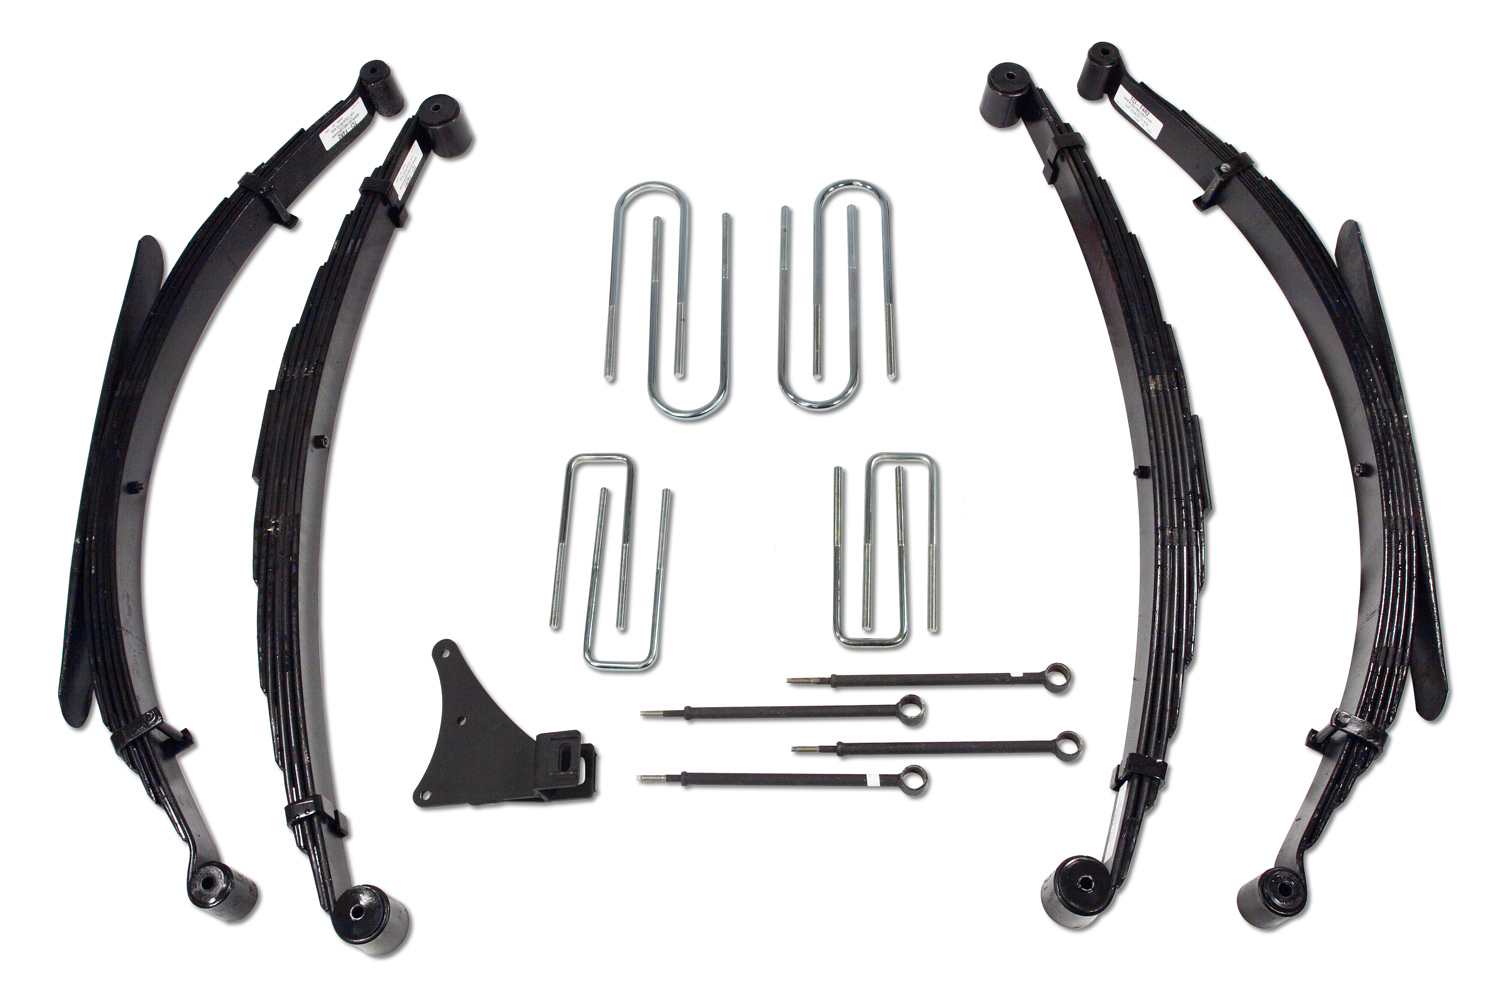 4 Inch Lift Kit 1986-97 Ford F350 4x4 Standard & Crewcab - 4 Inch Lift Kit with Rear Leaf Springs Tuff Country